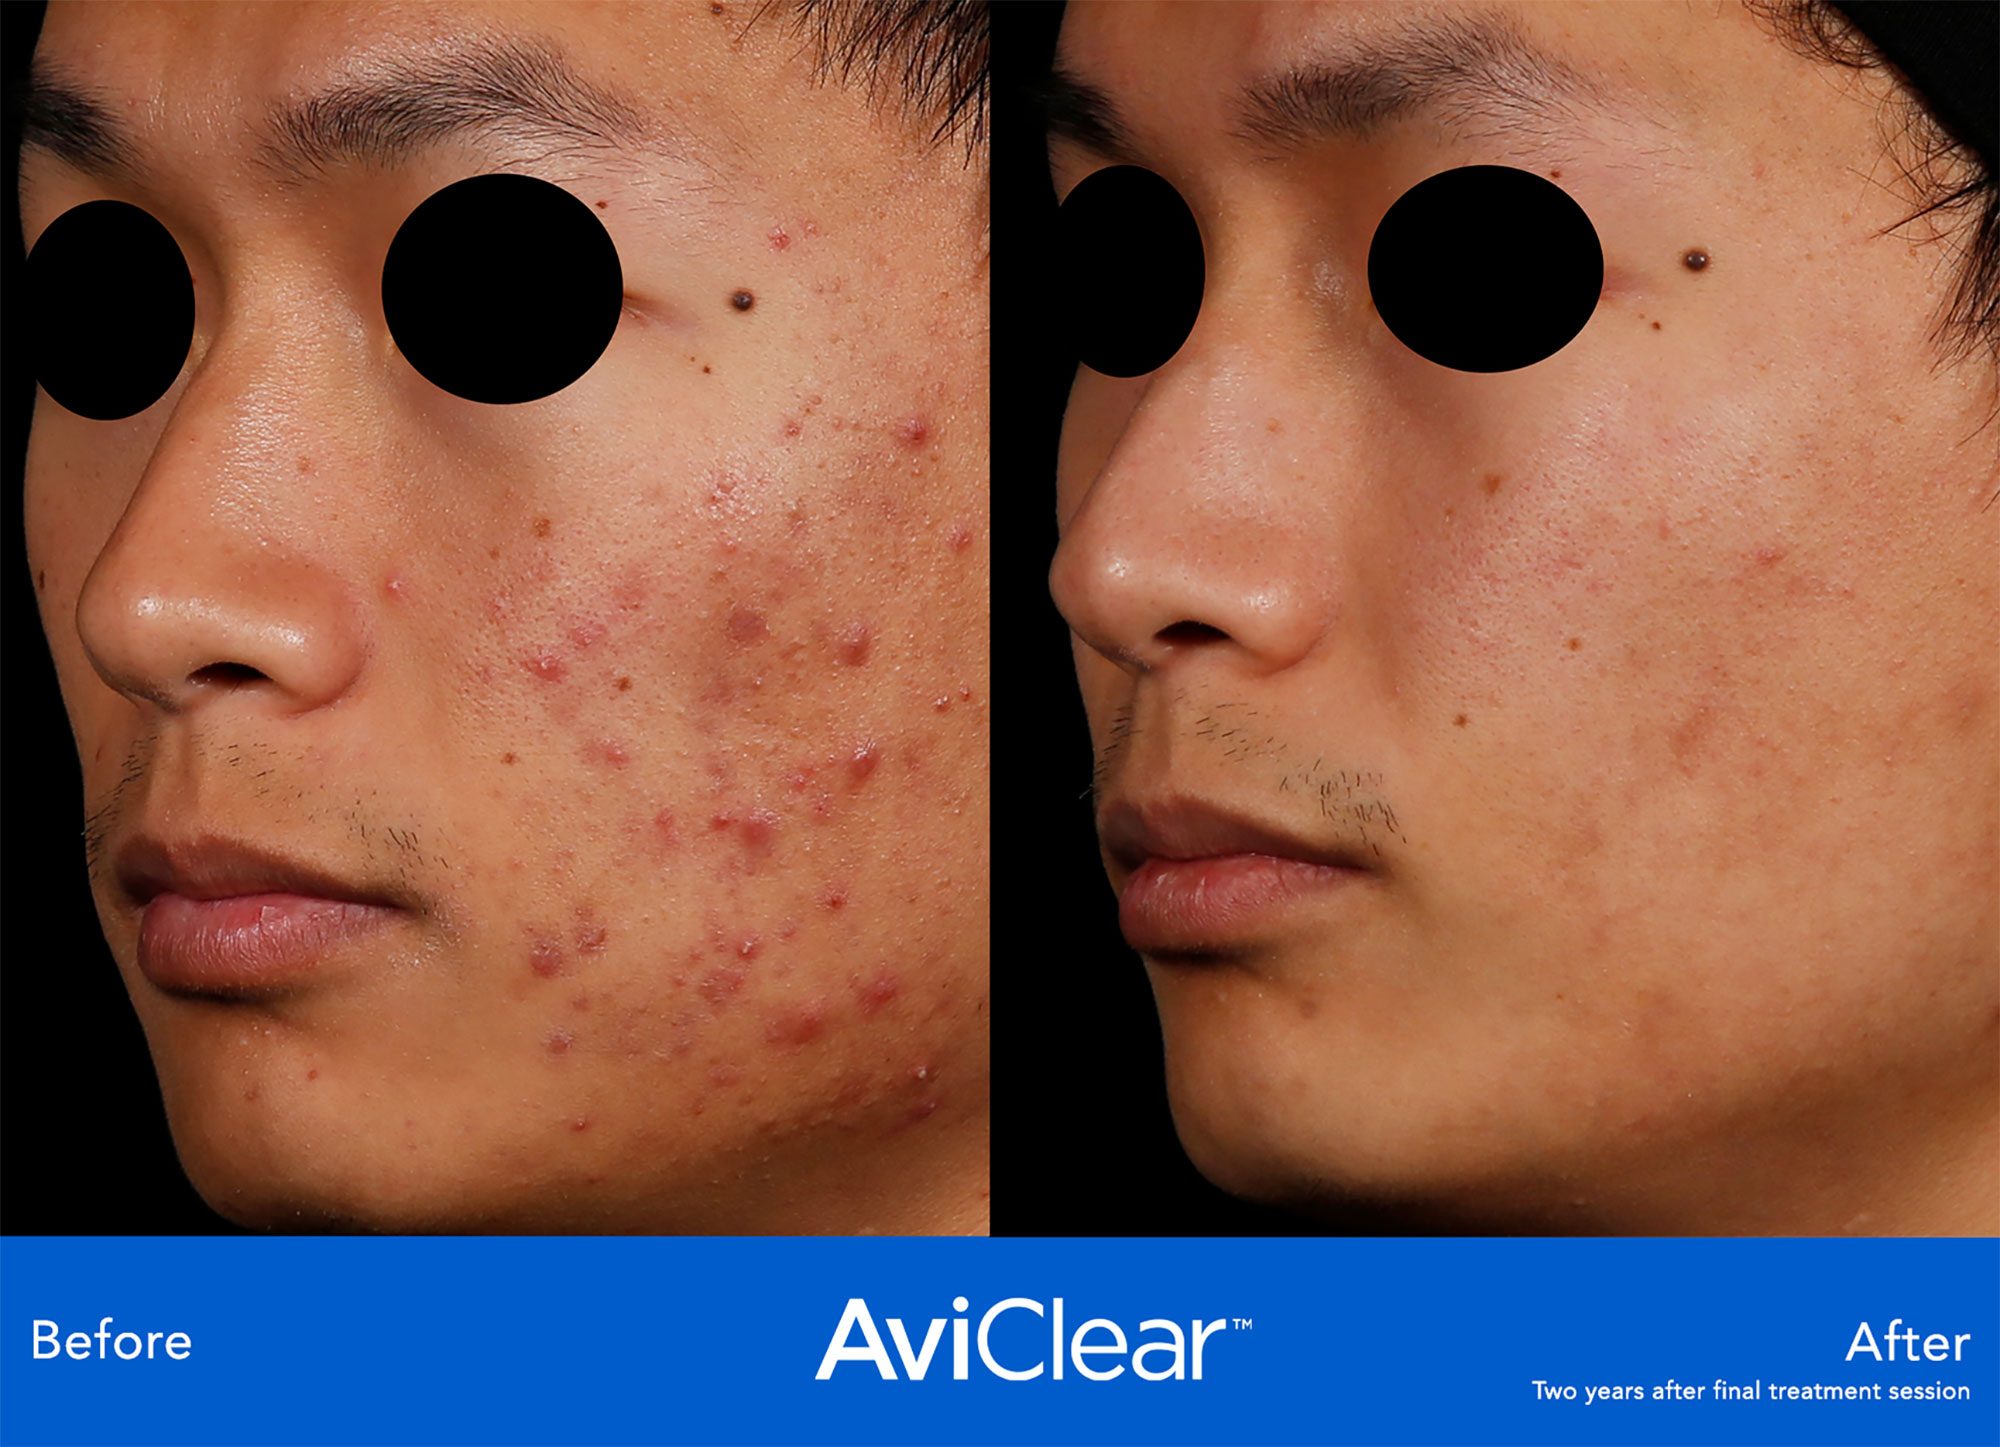 AviClear™ Cutera Acne Before & After treatment In Needham, MA | Wave Medical Aesthetics